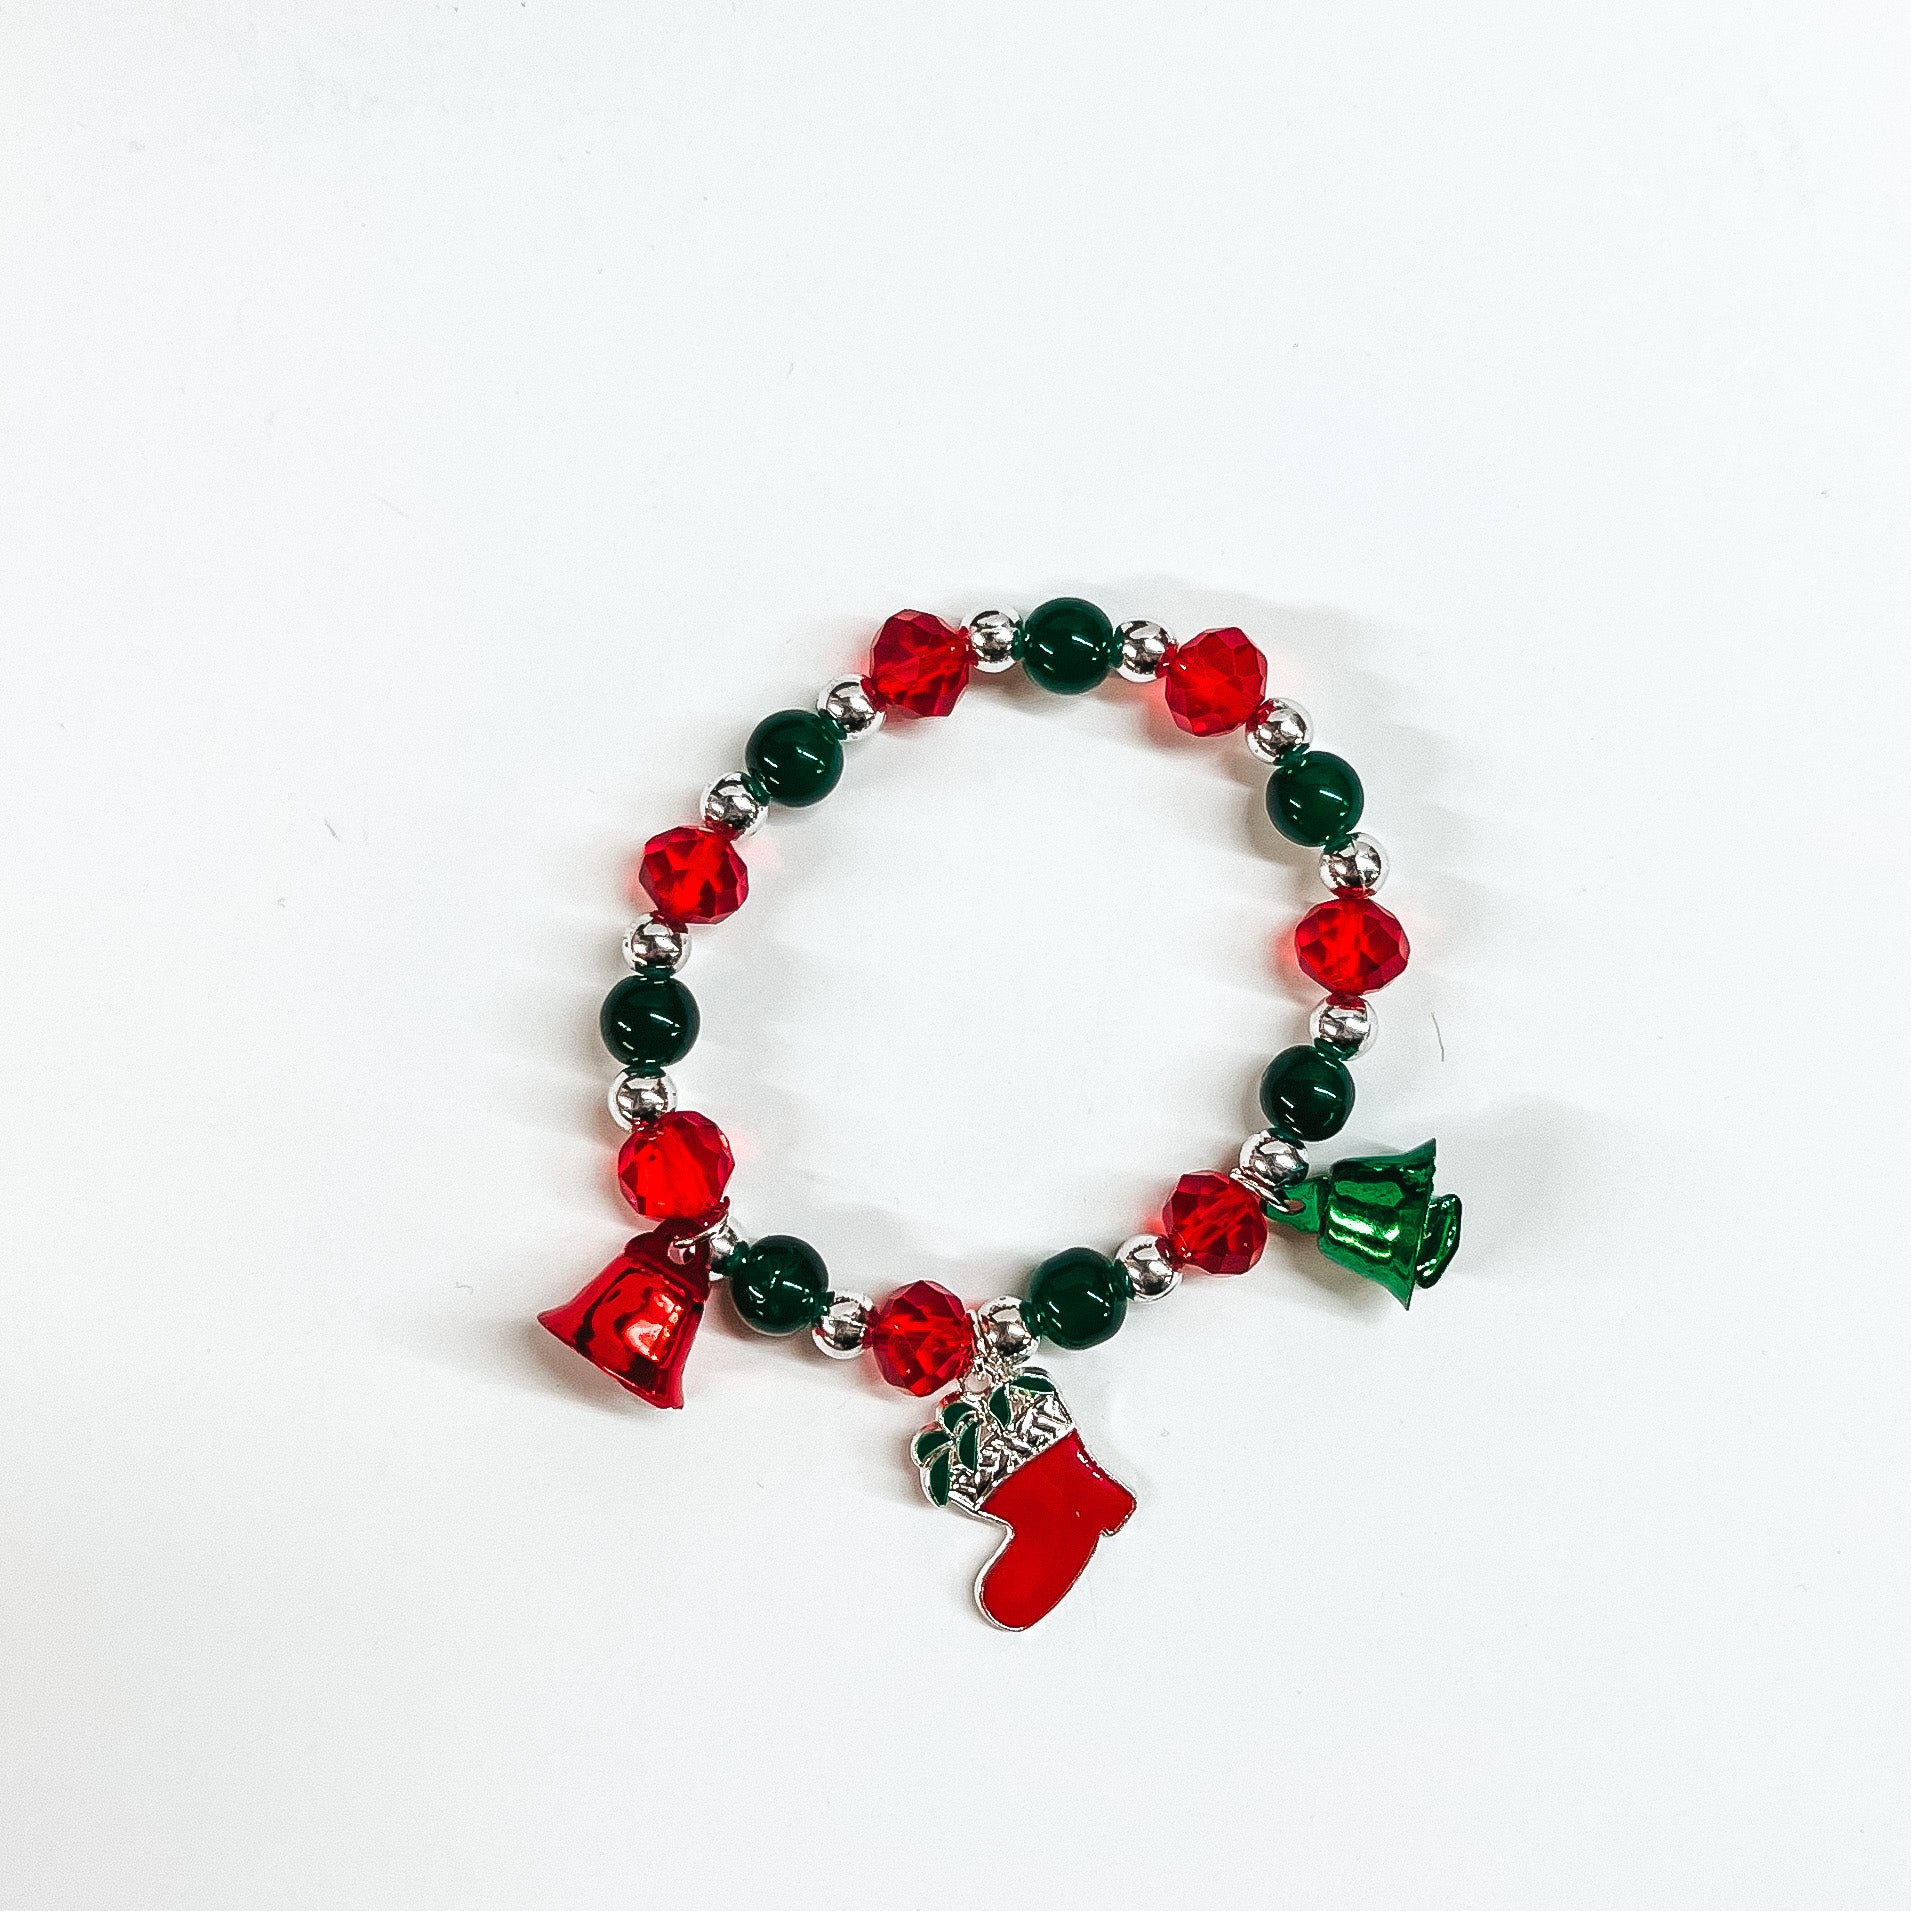 This is a beaded bracelet with three christmas charms such as two bells in red and green, and a stocking charm in red and silver. The bracelet has red crystal beads, silver circle beads, and green circle beads. This bracelet is laying on a white background.